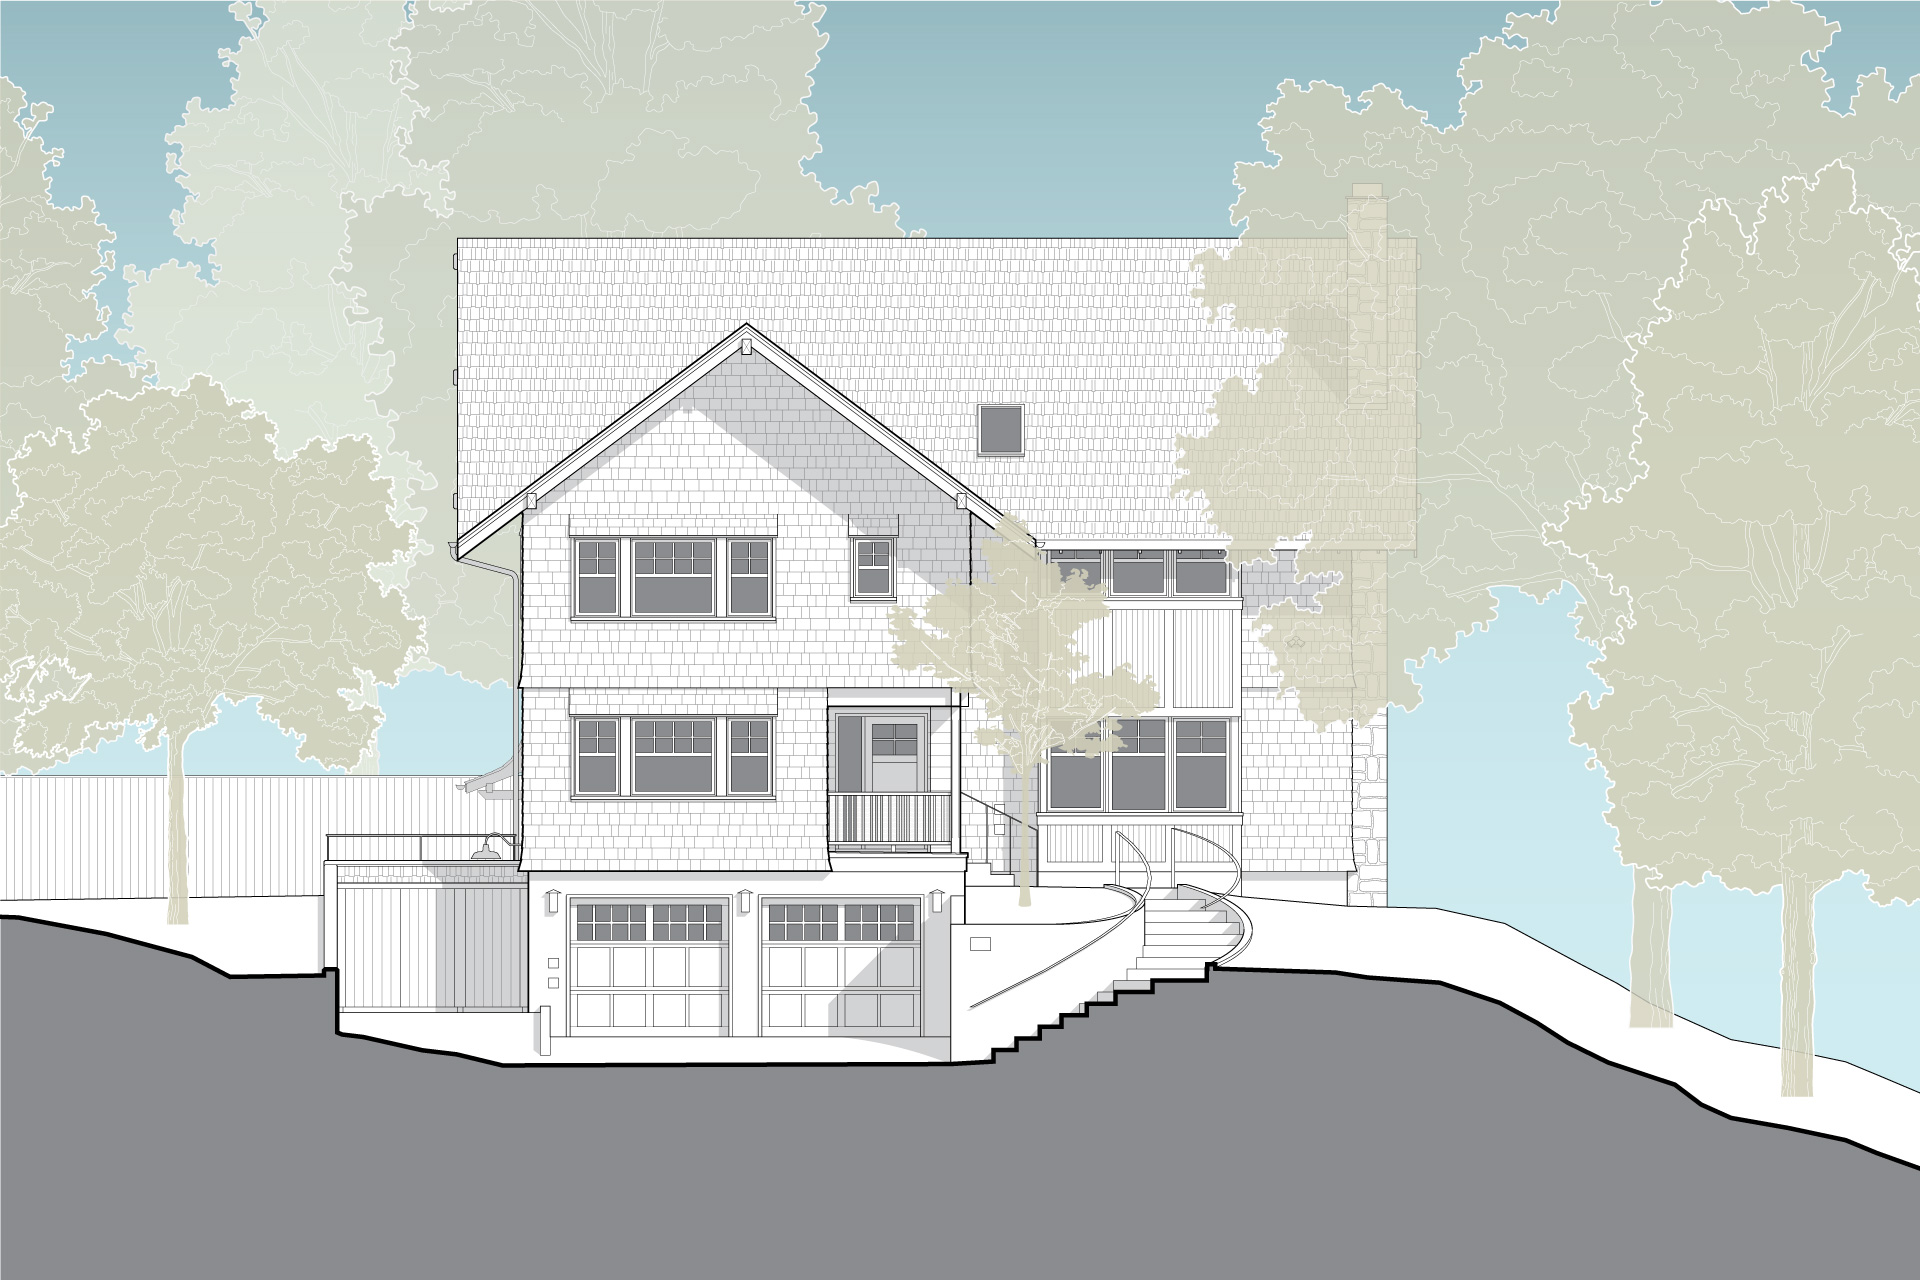 This is a drawing of the front of the Hillside House after renovations.